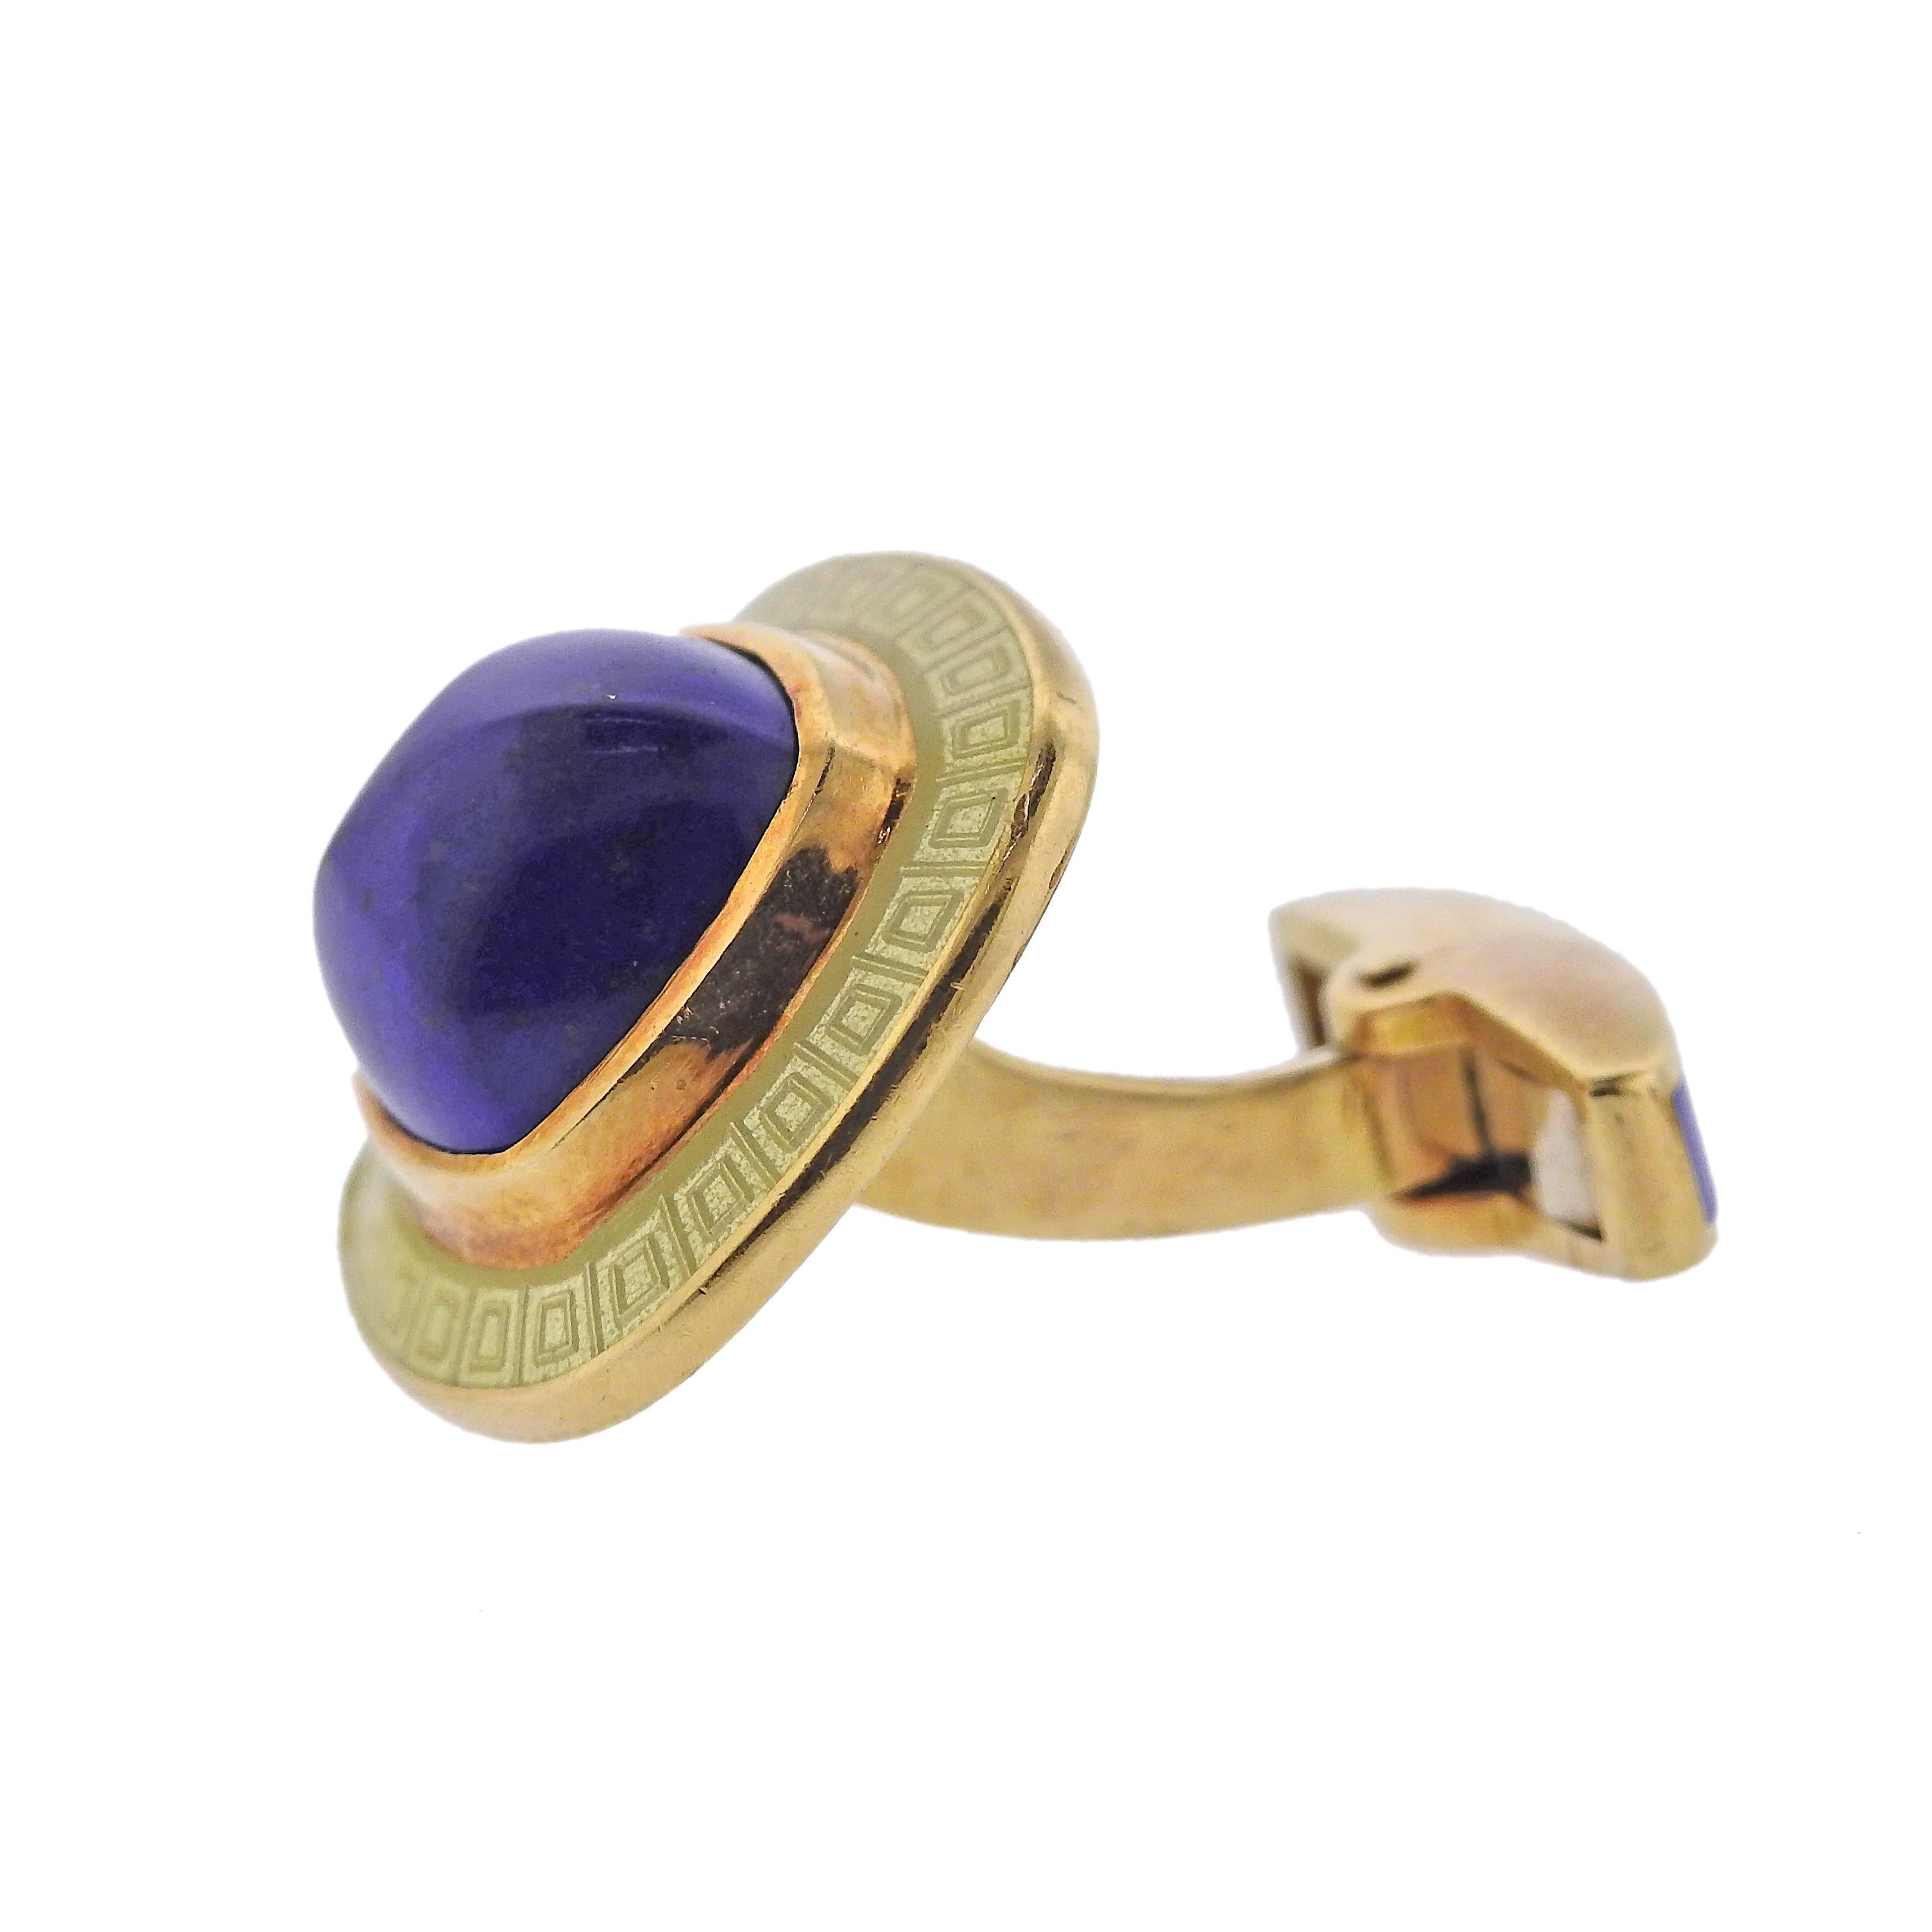 Pair of 18k yellow gold cufflinks by Deakin  & Francis, decorated with enamel and lapis lazuli. Cufflink top is 19mm x 19mm. Weight - 34.3 grams. Marked: D&F, English marks, England. 